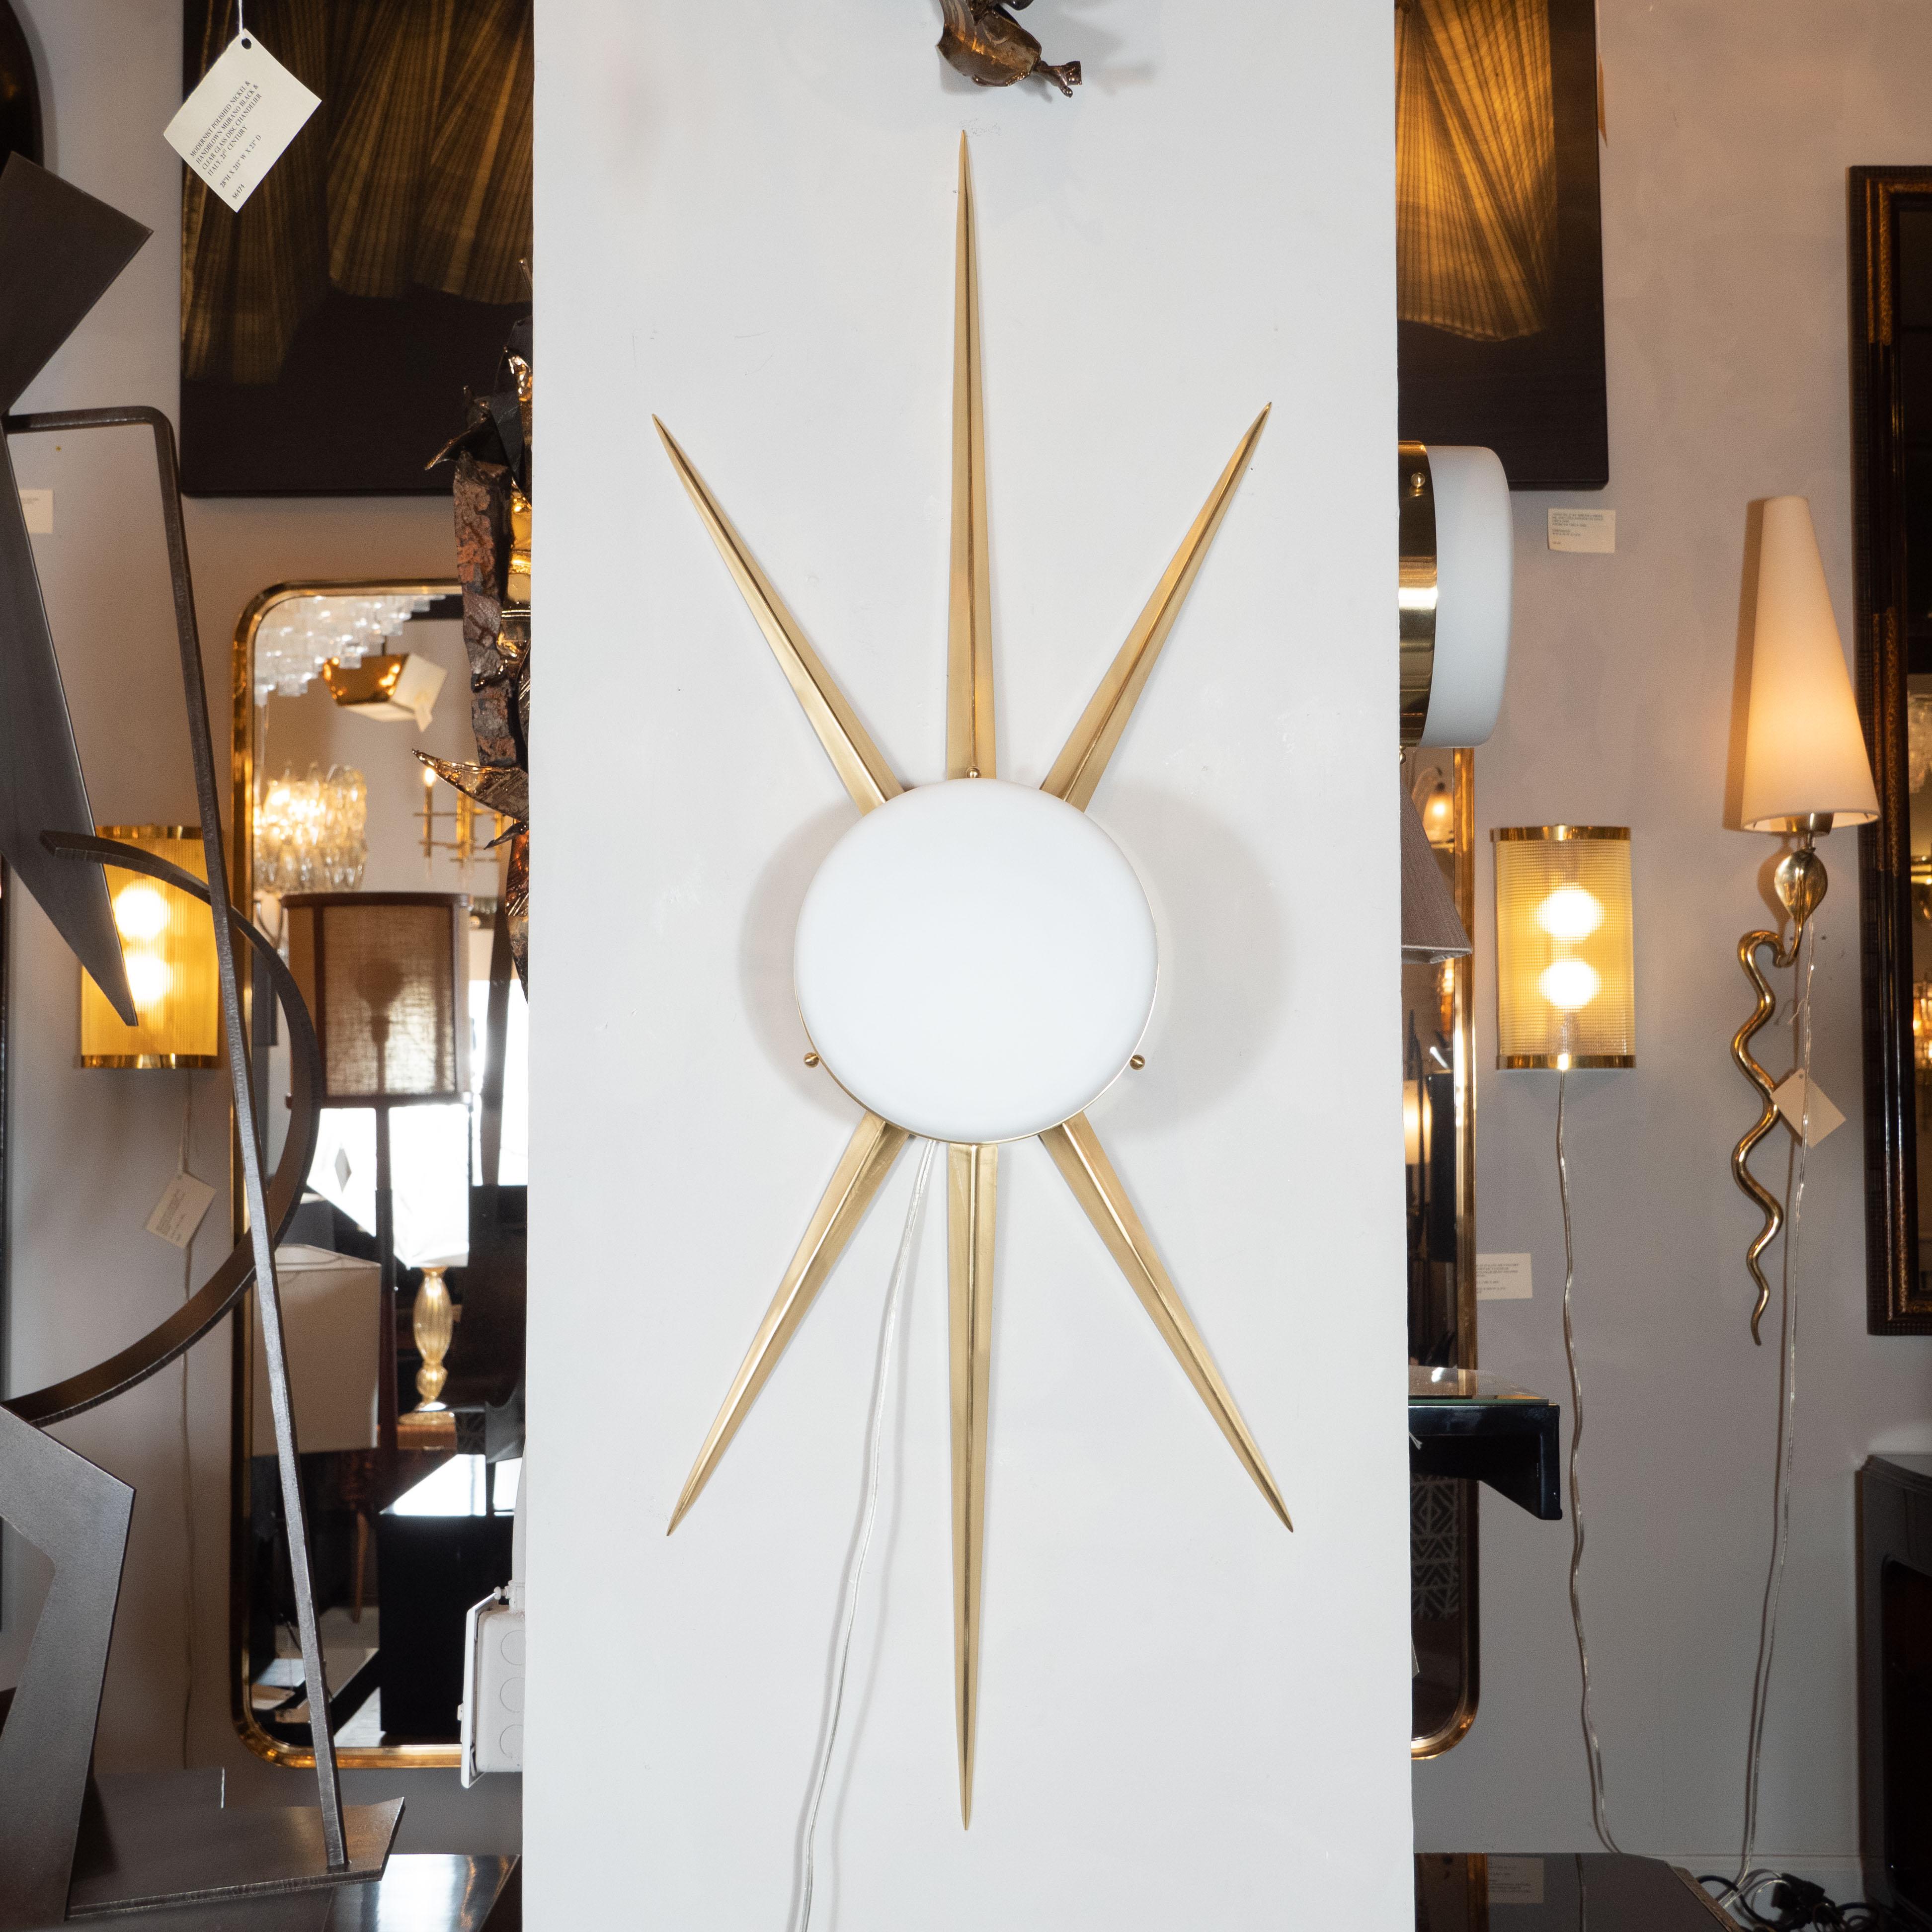 This graphic and dramatic pair of modernist sconces were realized in Murano, Italy, the island off the coast of Venice renowned for centuries for its superlative glass production. They feature circular glass shades in hand blown frosted Murano glass